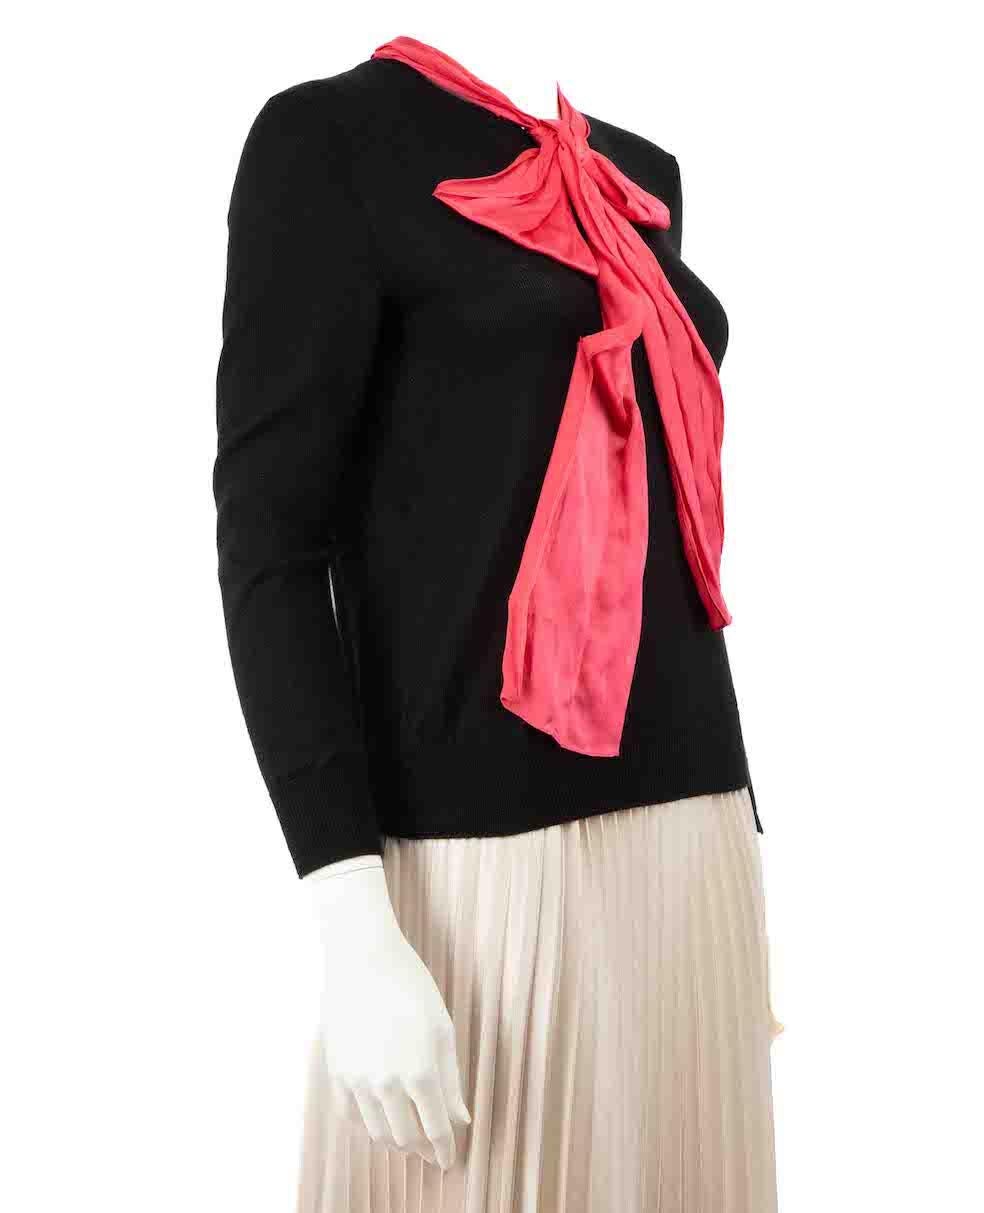 CONDITION is Very good. Minimal wear to jumper is evident. Minimal wear to the edges of the silk bow with light fraying on this used Gucci designer resale item.
 
 Details
 Black
 Cashmere
 Jumper
 Knitted
 Round neck
 Long sleeves
 Contrast pink